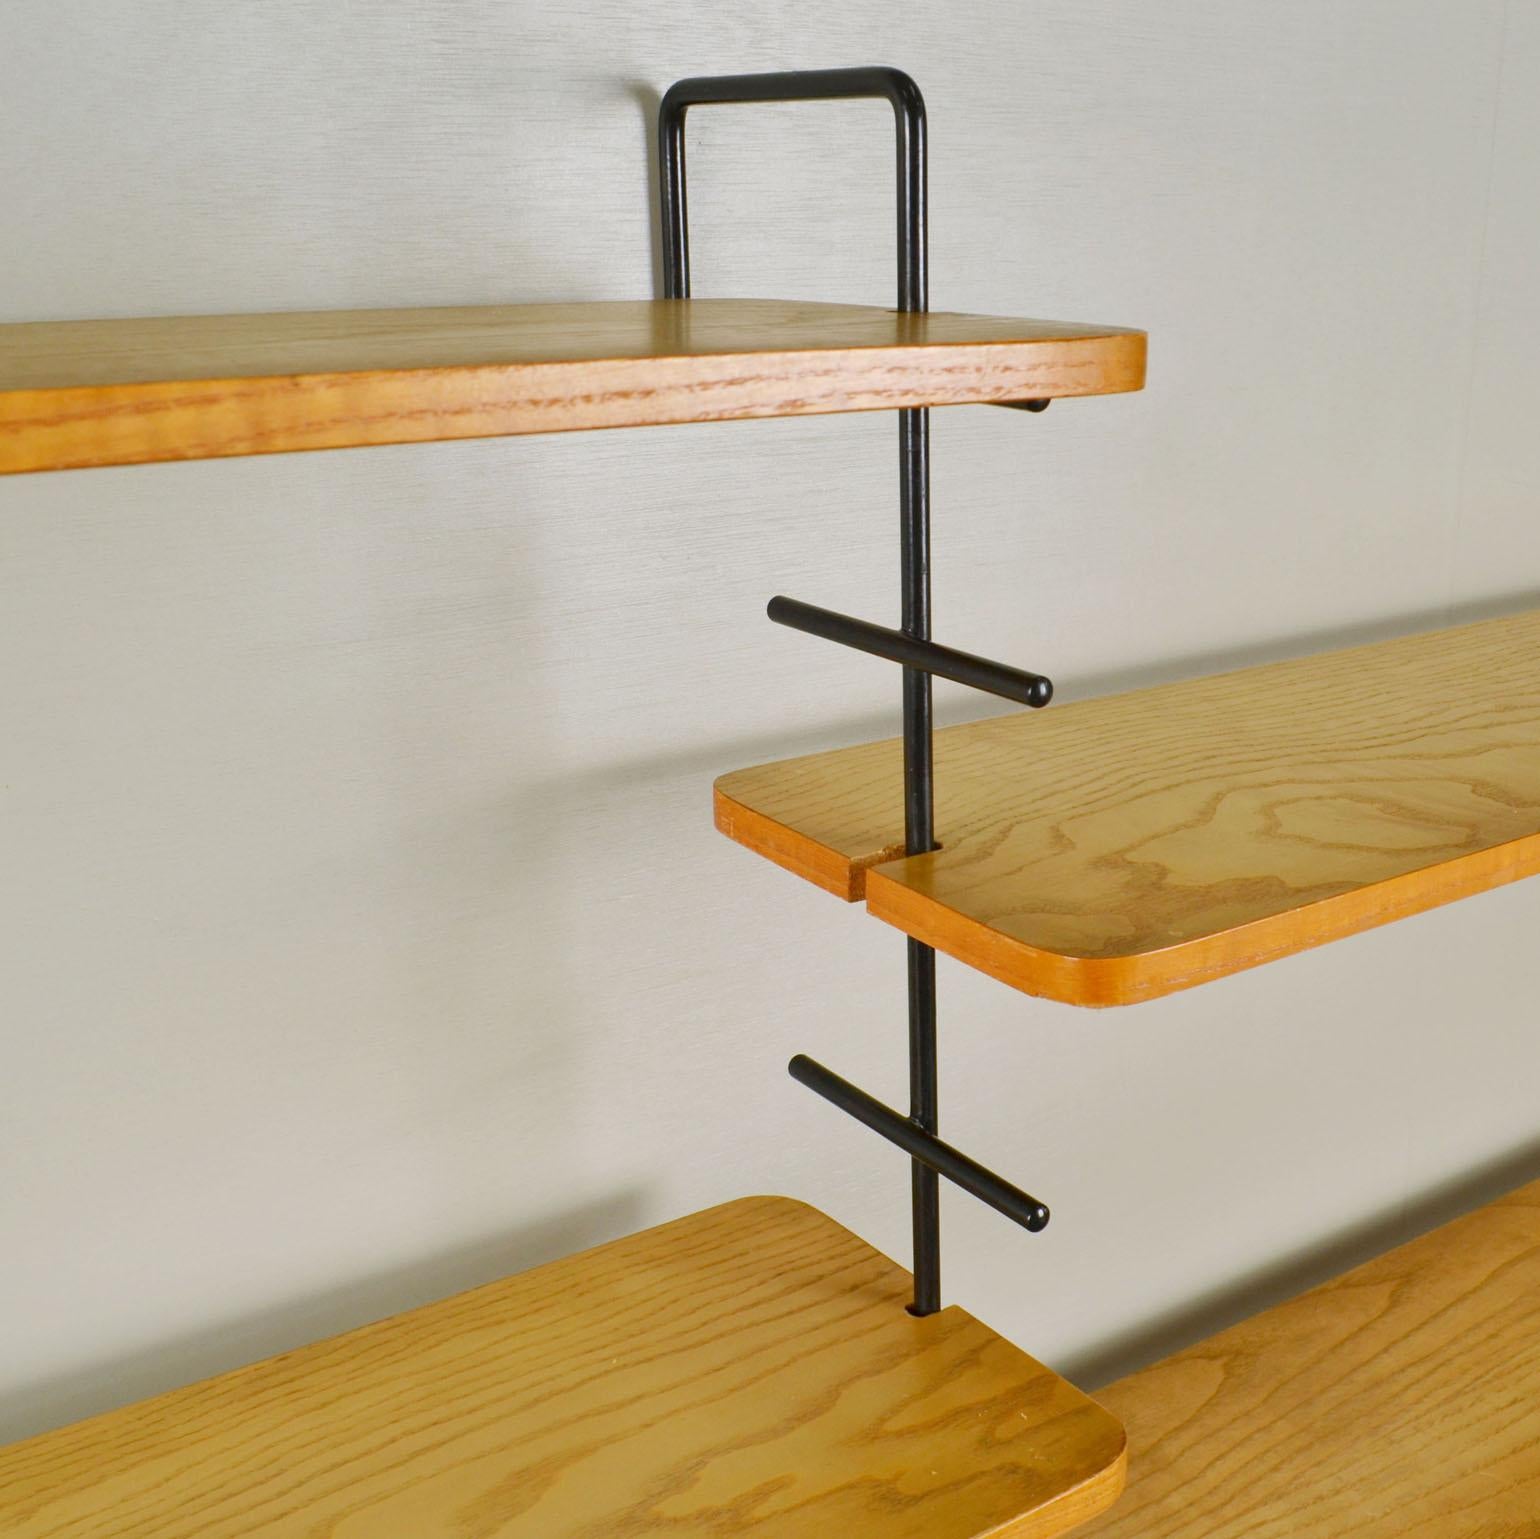 Minimalist Modular Wall Mounted 1960's Shelving Unit  In Excellent Condition For Sale In London, GB